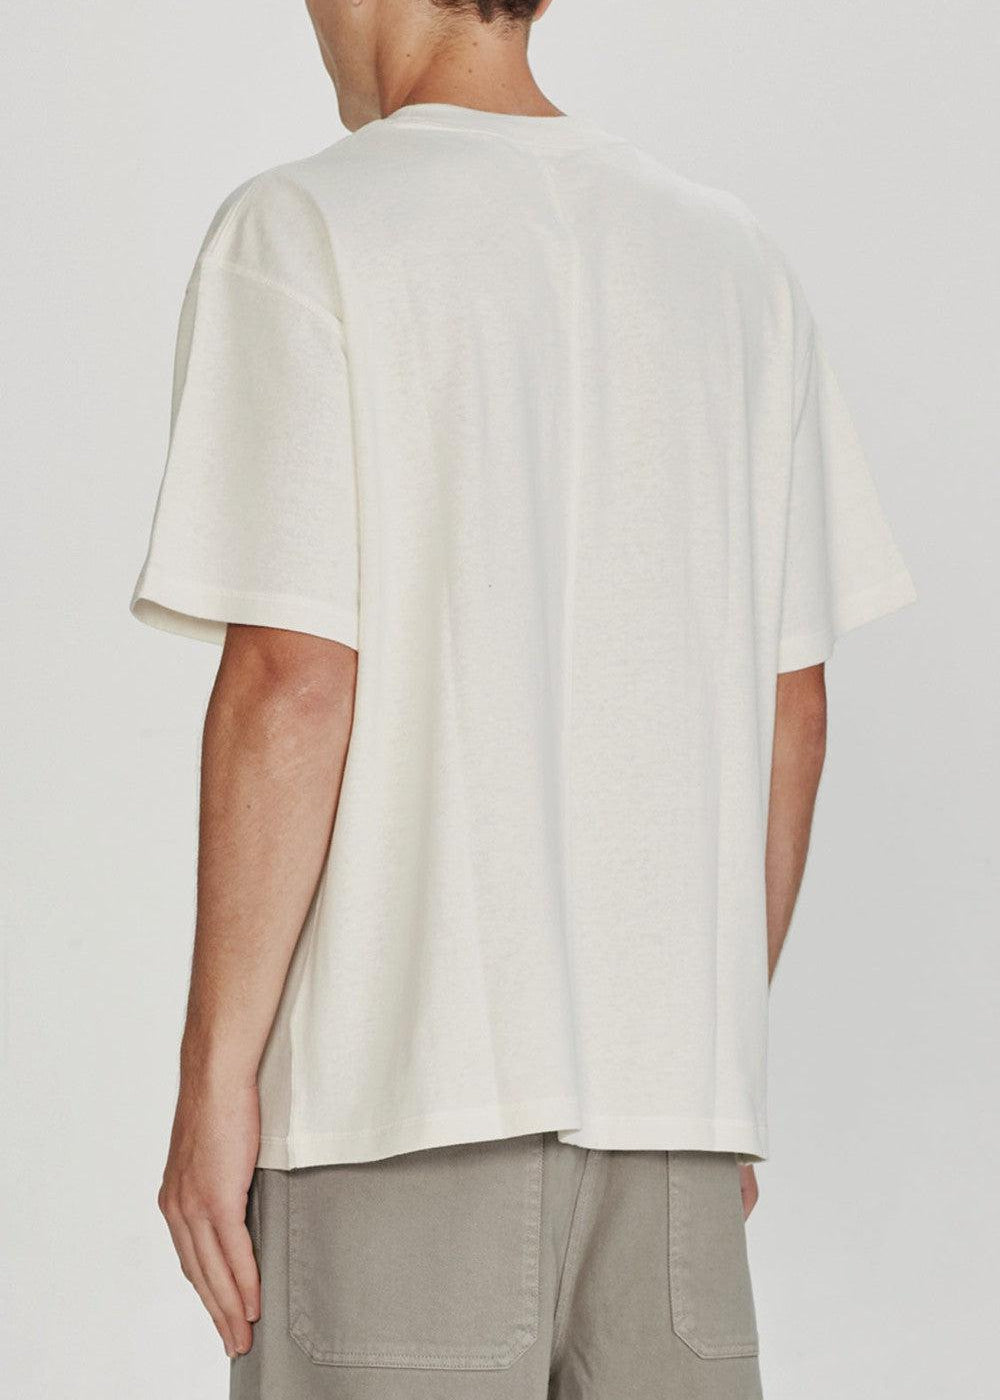 Commoners Hemp Jersey SS Tee - Rice White | COMMONERS | Mad About The Boy